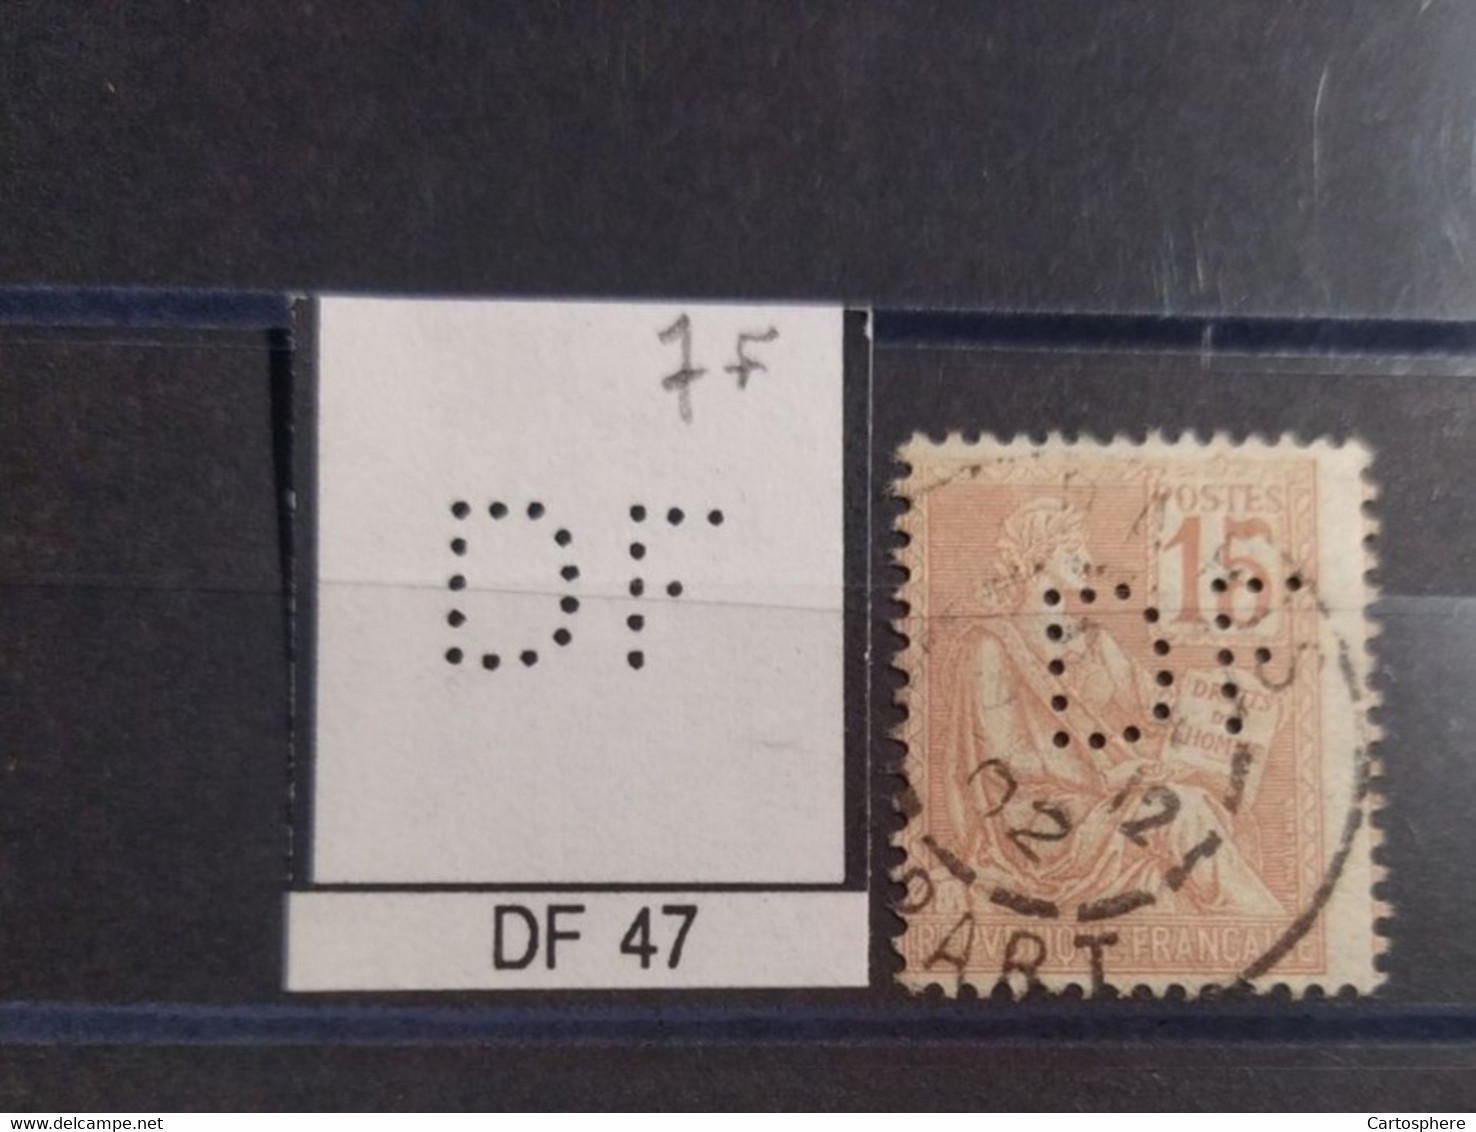 FRANCE DF 47 TIMBRE INDICE 7  PERFORE PERFORES PERFIN PERFINS PERFO PERFORATION PERFORIERT - Used Stamps